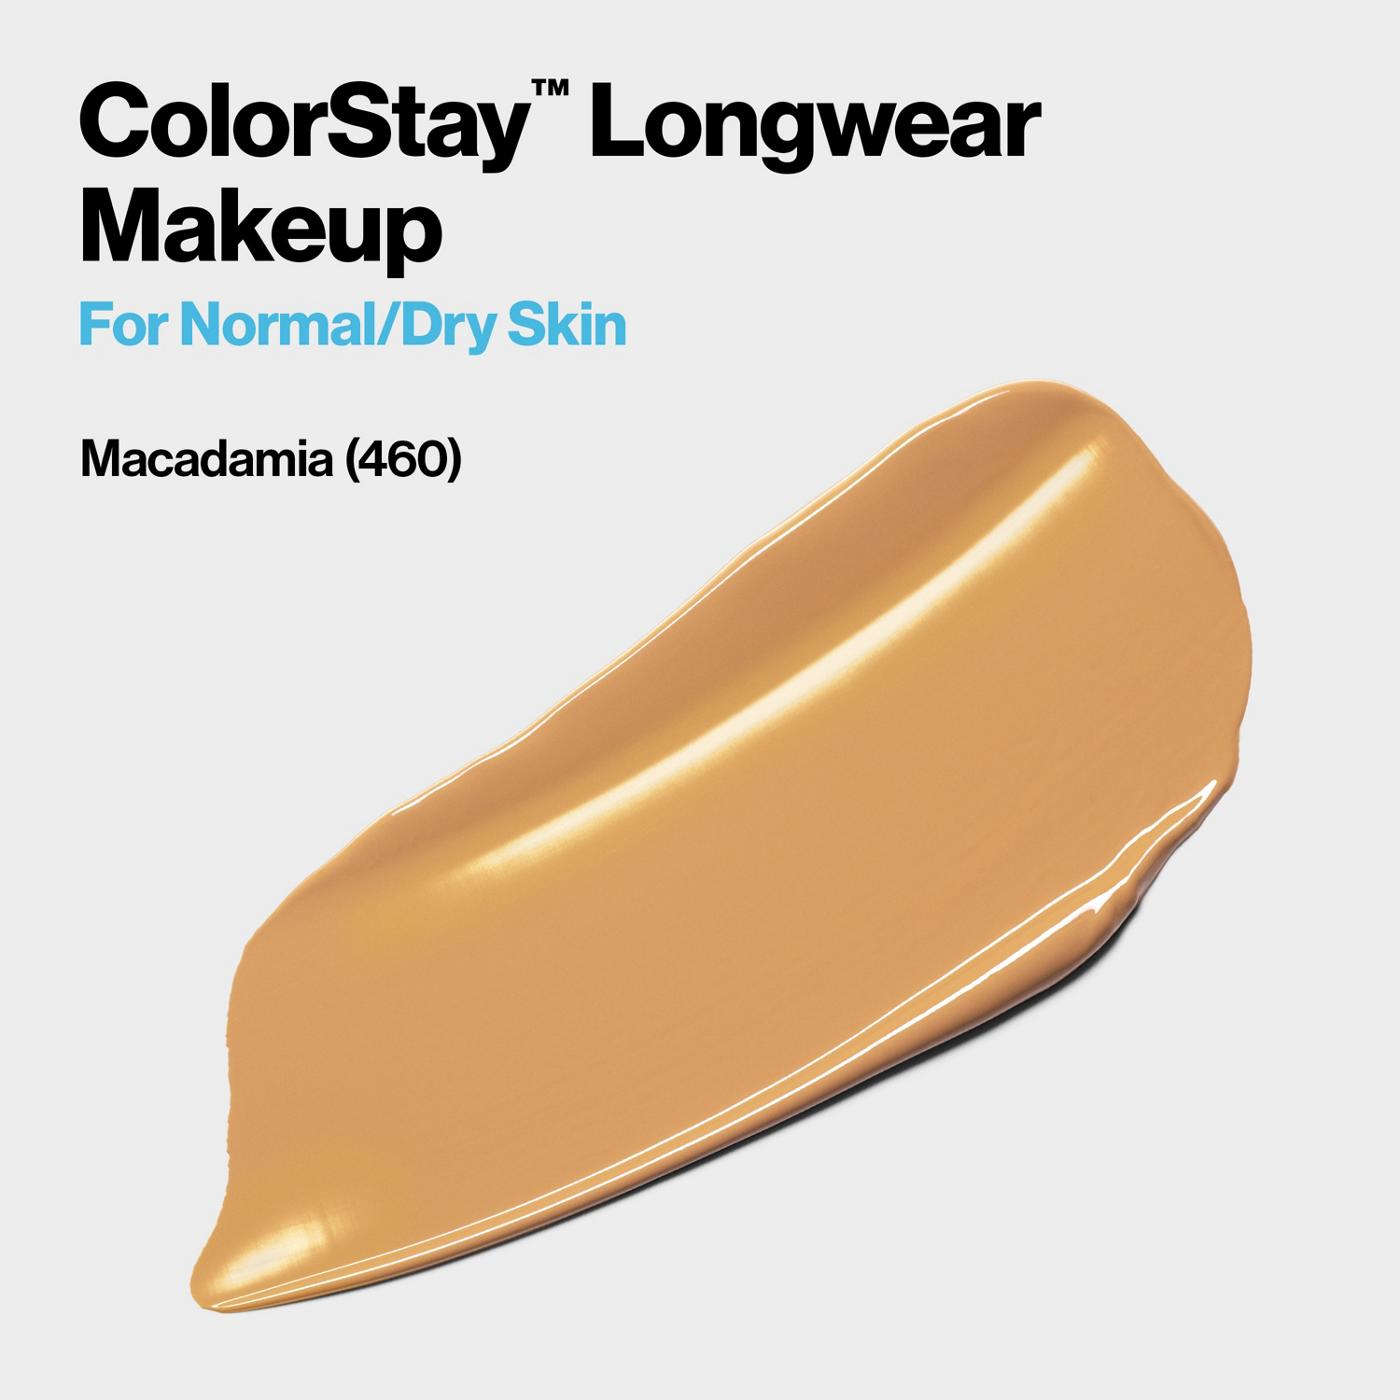 Revlon ColorStay Makeup for Normal/Dry Skin, 460 Macadamia; image 5 of 6